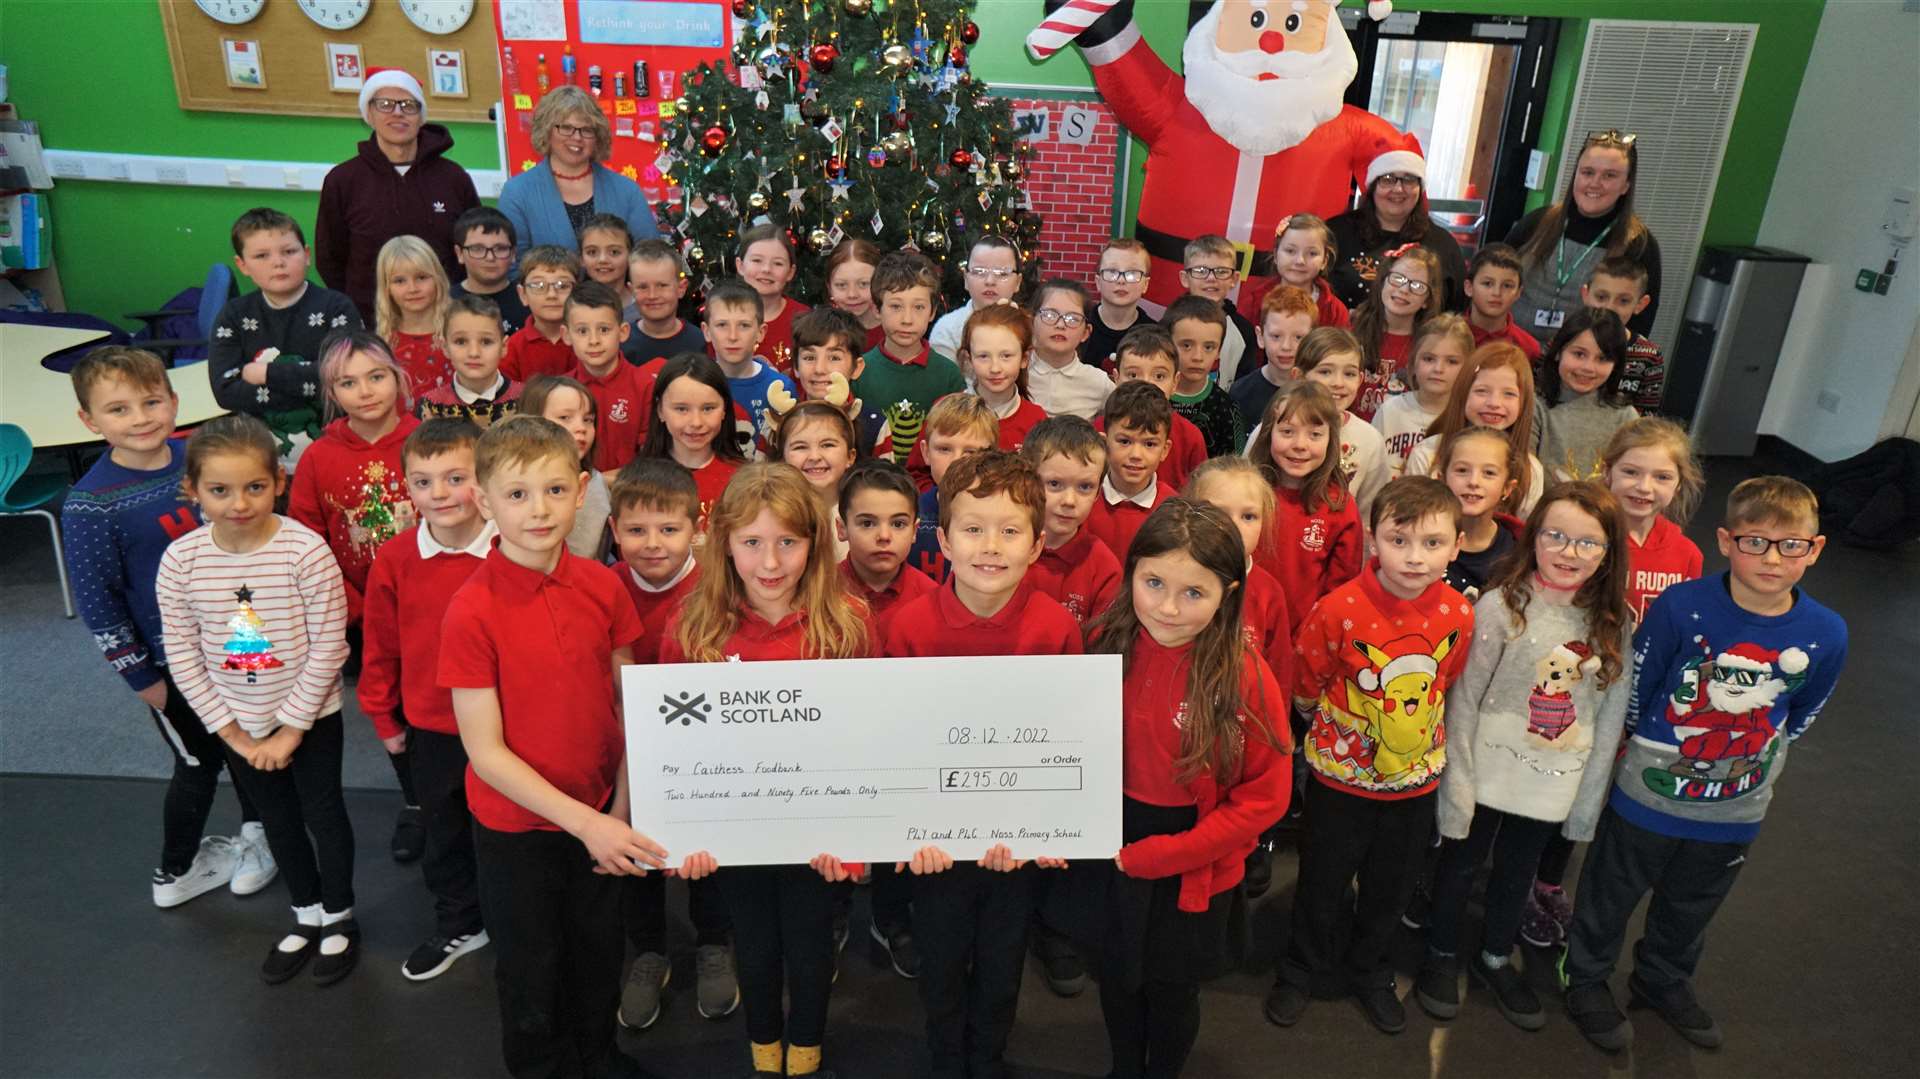 Noss Primary 4 Green and Yellow classes made 'reindeer dust' and sold it to make the grand total of £295 for the local food bank. The reindeer dust is made from oats and sprinkled on the lawn to encourage Santa to pay a visit. Picture: DGS